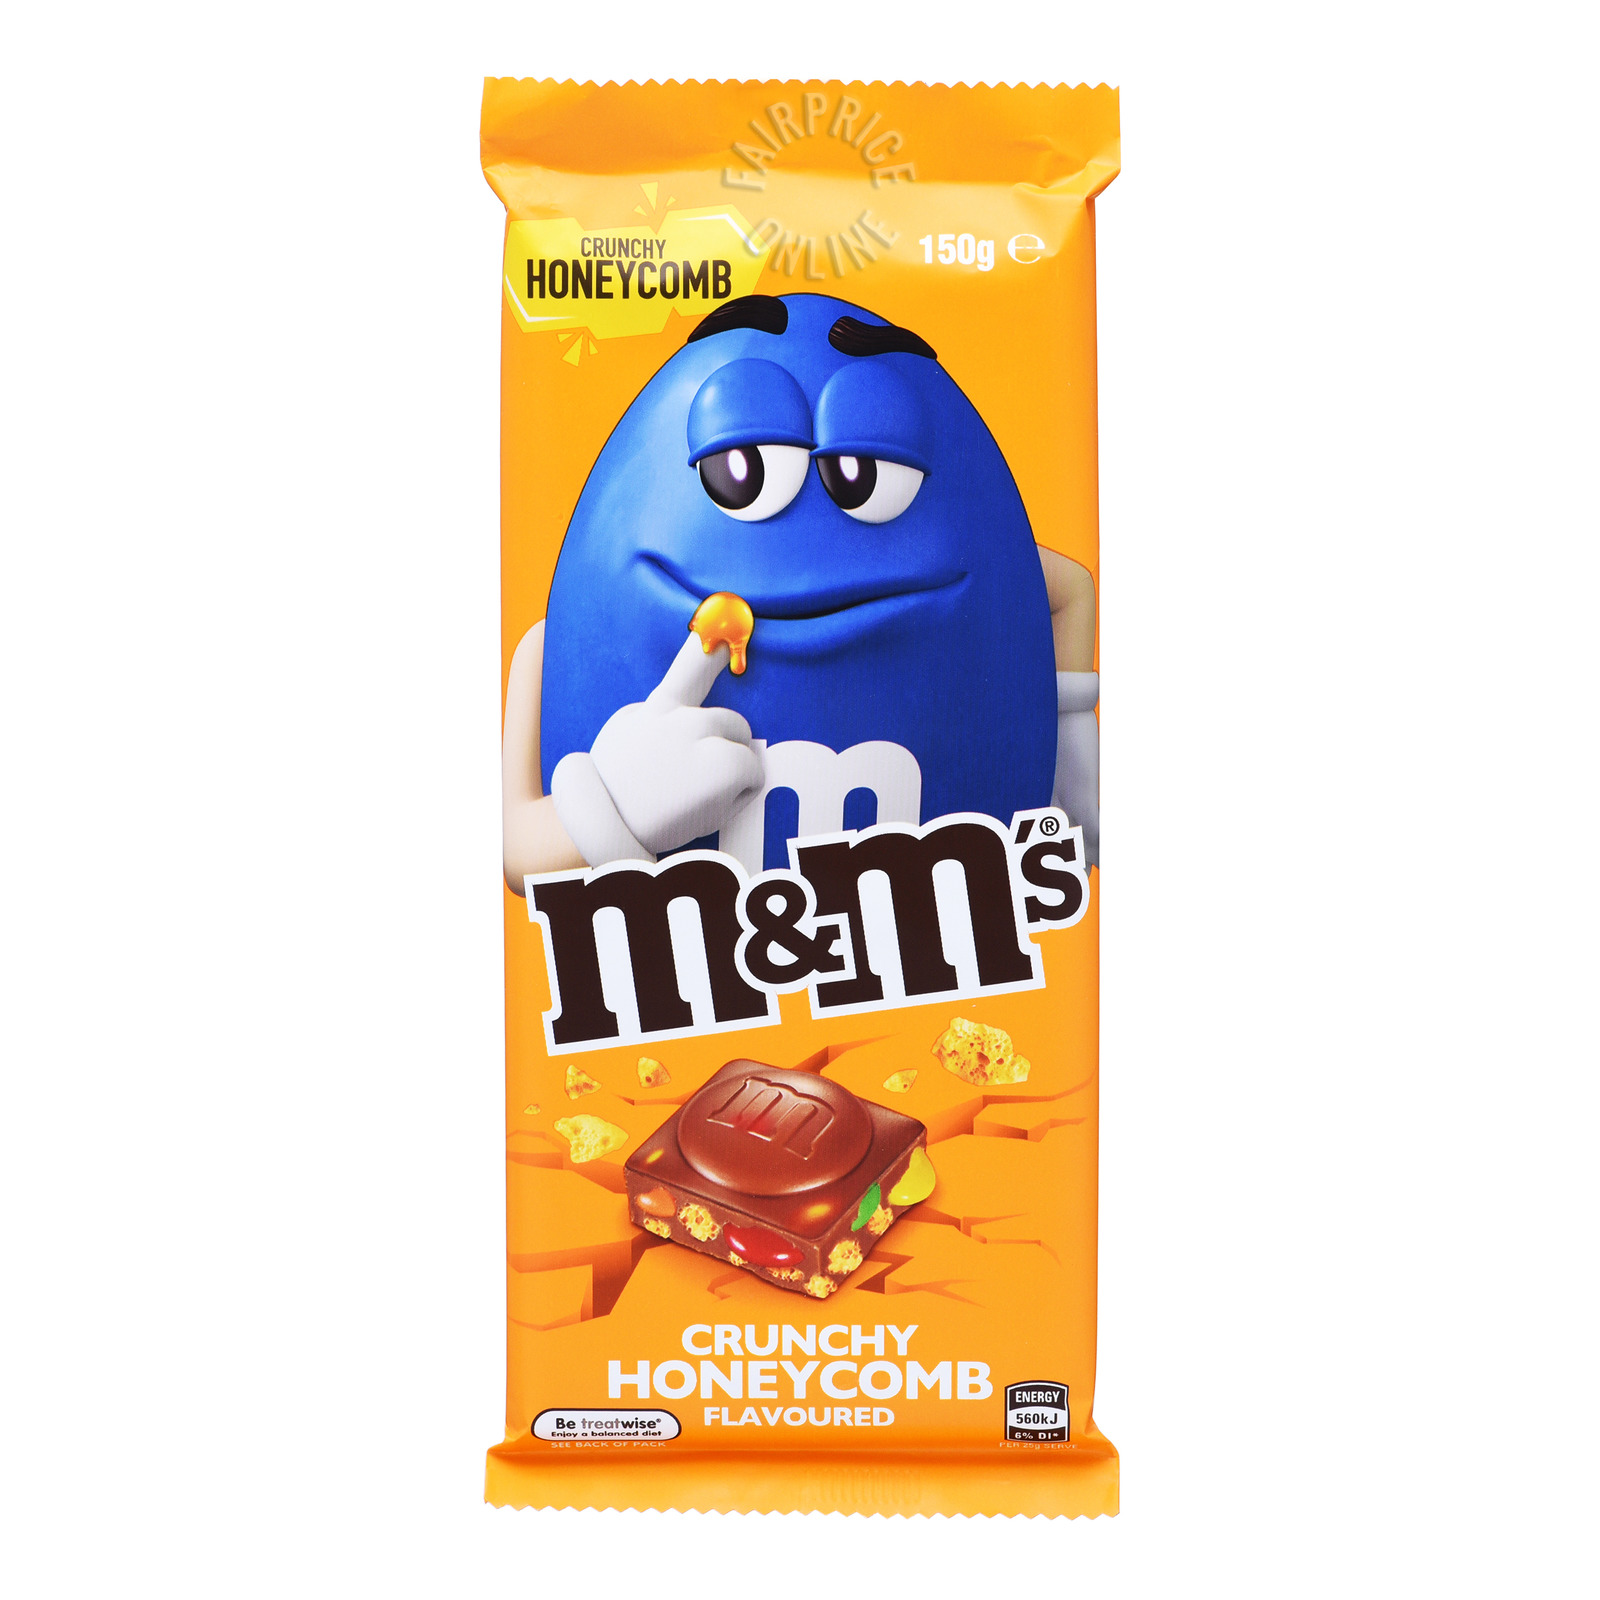 M&M’s Chocolate Bars now available at FairPrice for $4.40 - 2